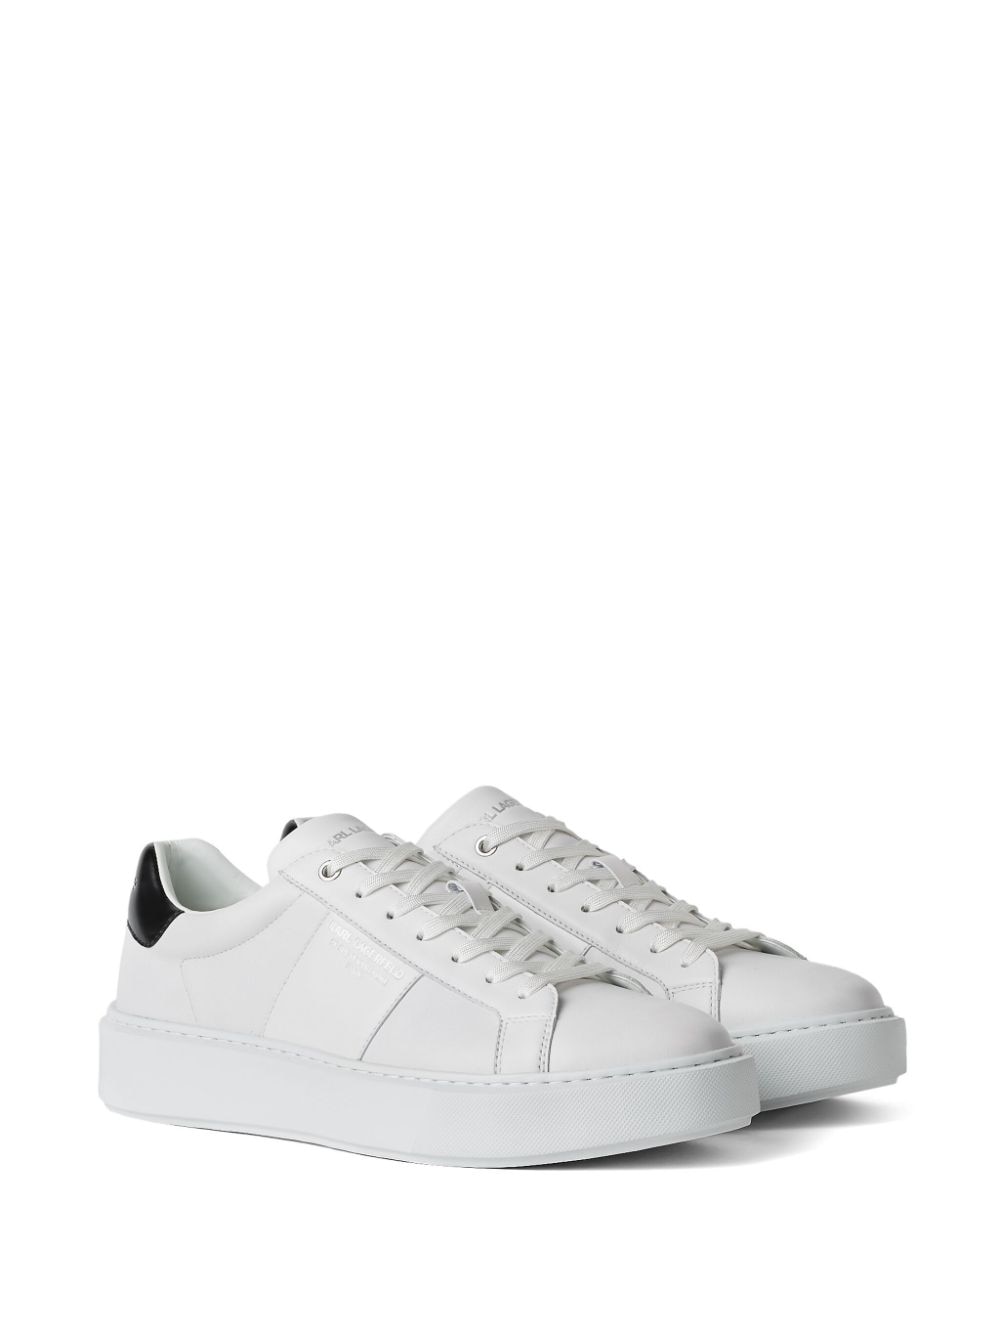 Karl Lagerfeld Rue St-Guillaume Maxi Kup sneakers - Wit